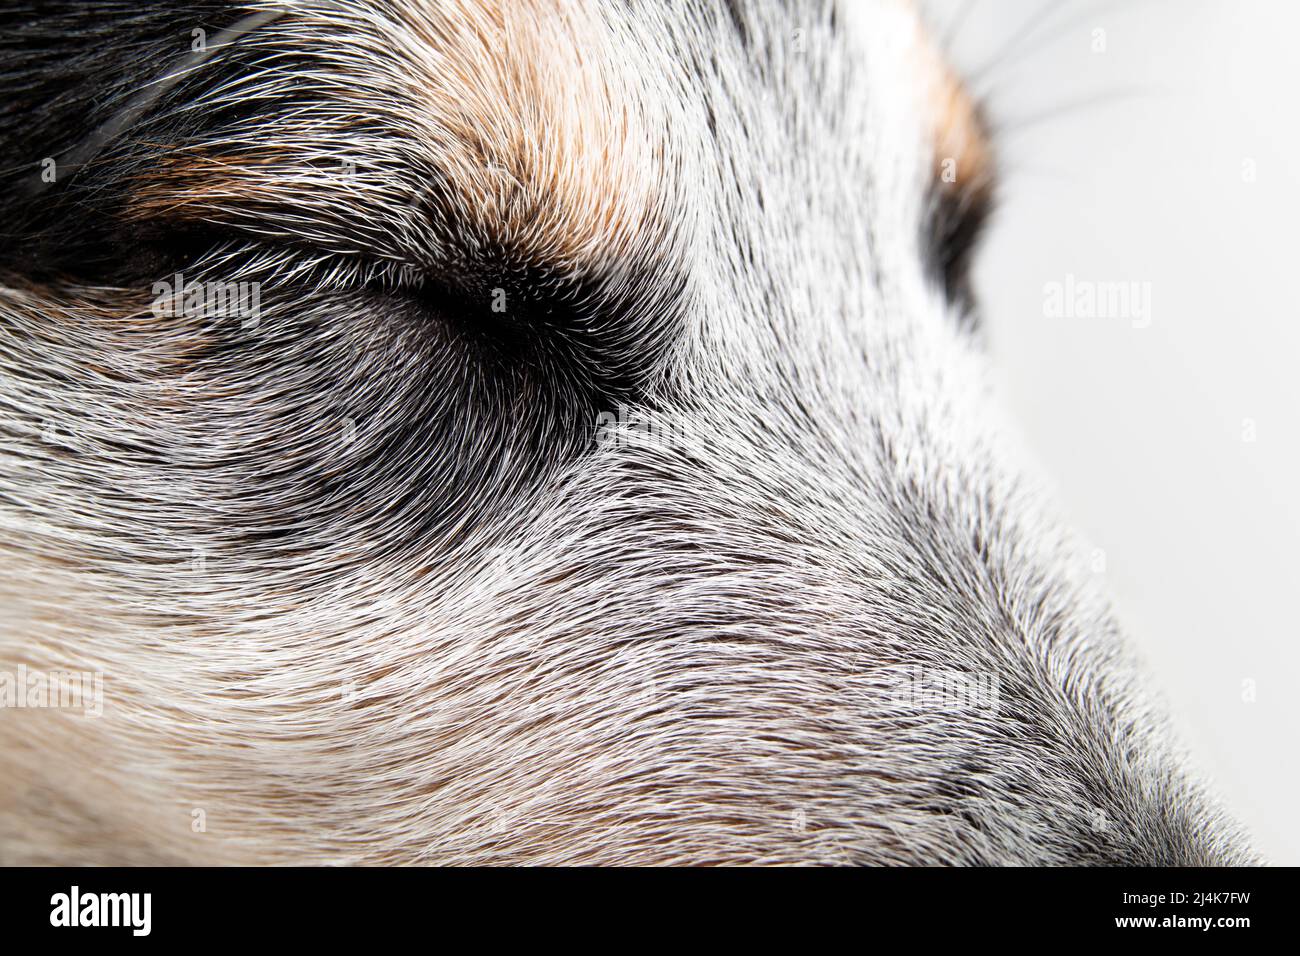 Cute puppy sleeping or napping, close up. Side view of black and white dog with closed eyes. 9 week old male blue heeler pup. Tranquil scene. Stock Photo